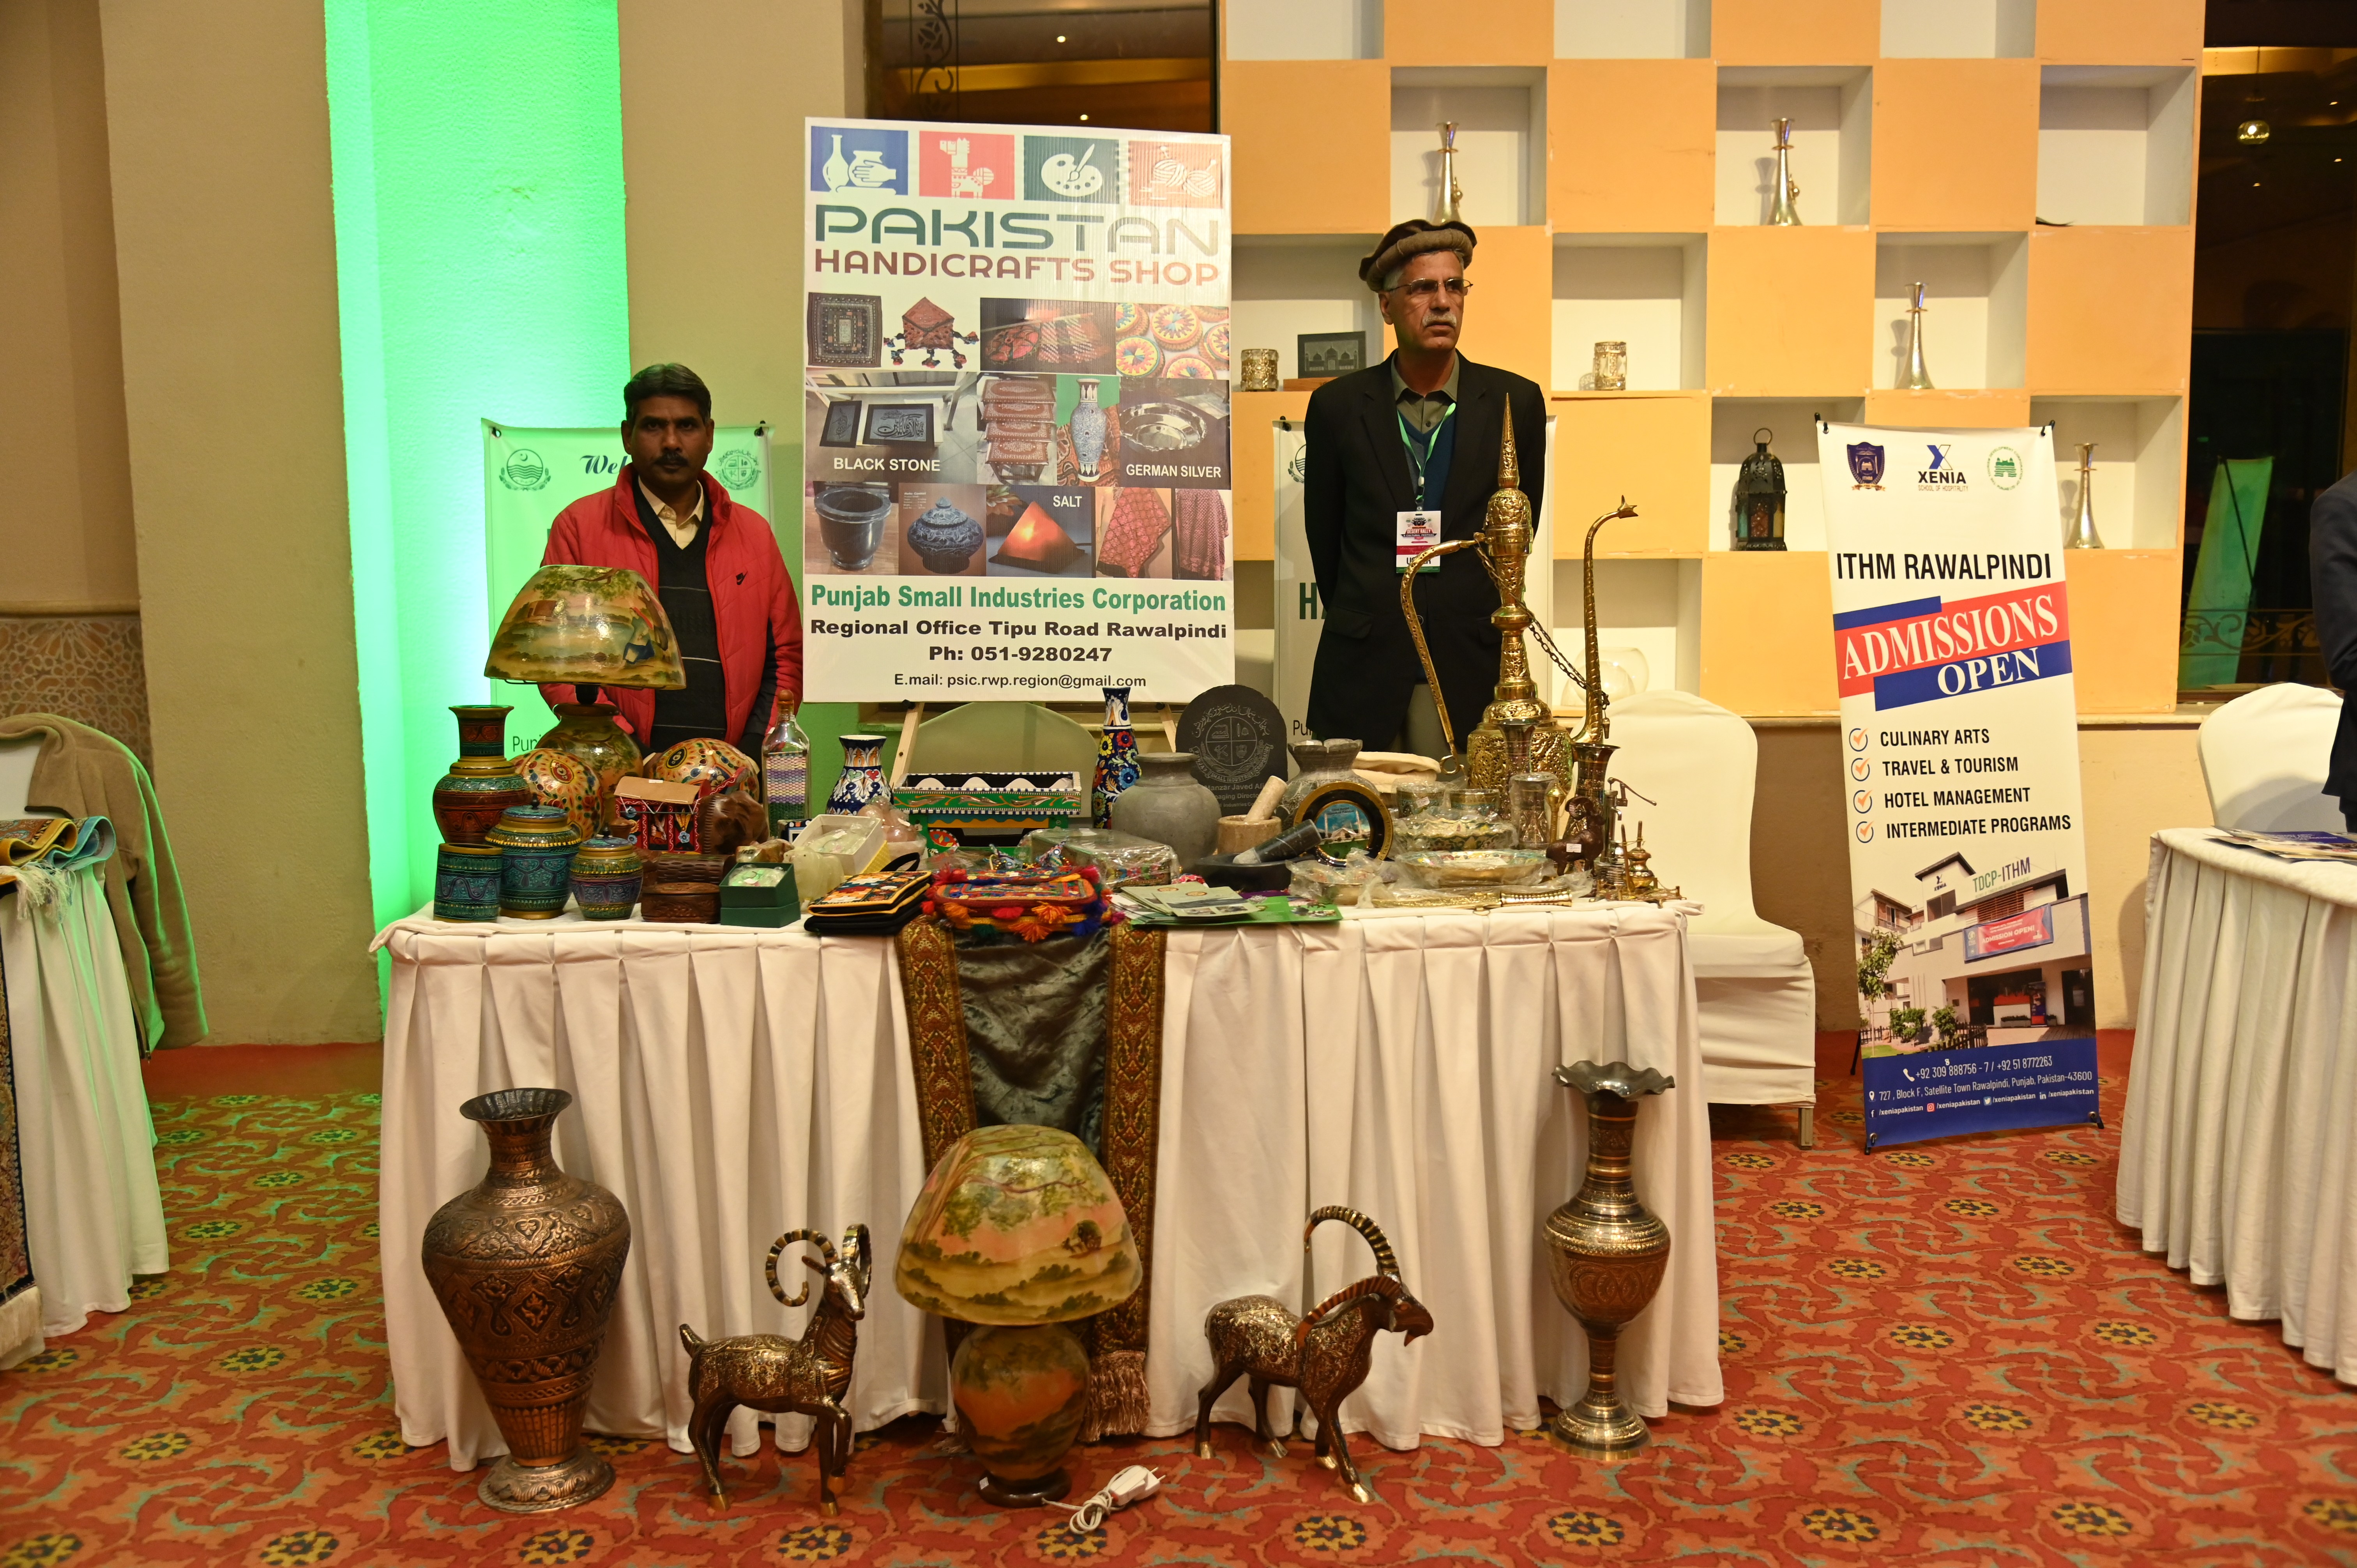 The stall of Pakistan Handicrafts Shop set up by The Punjab Small Industries Corporation